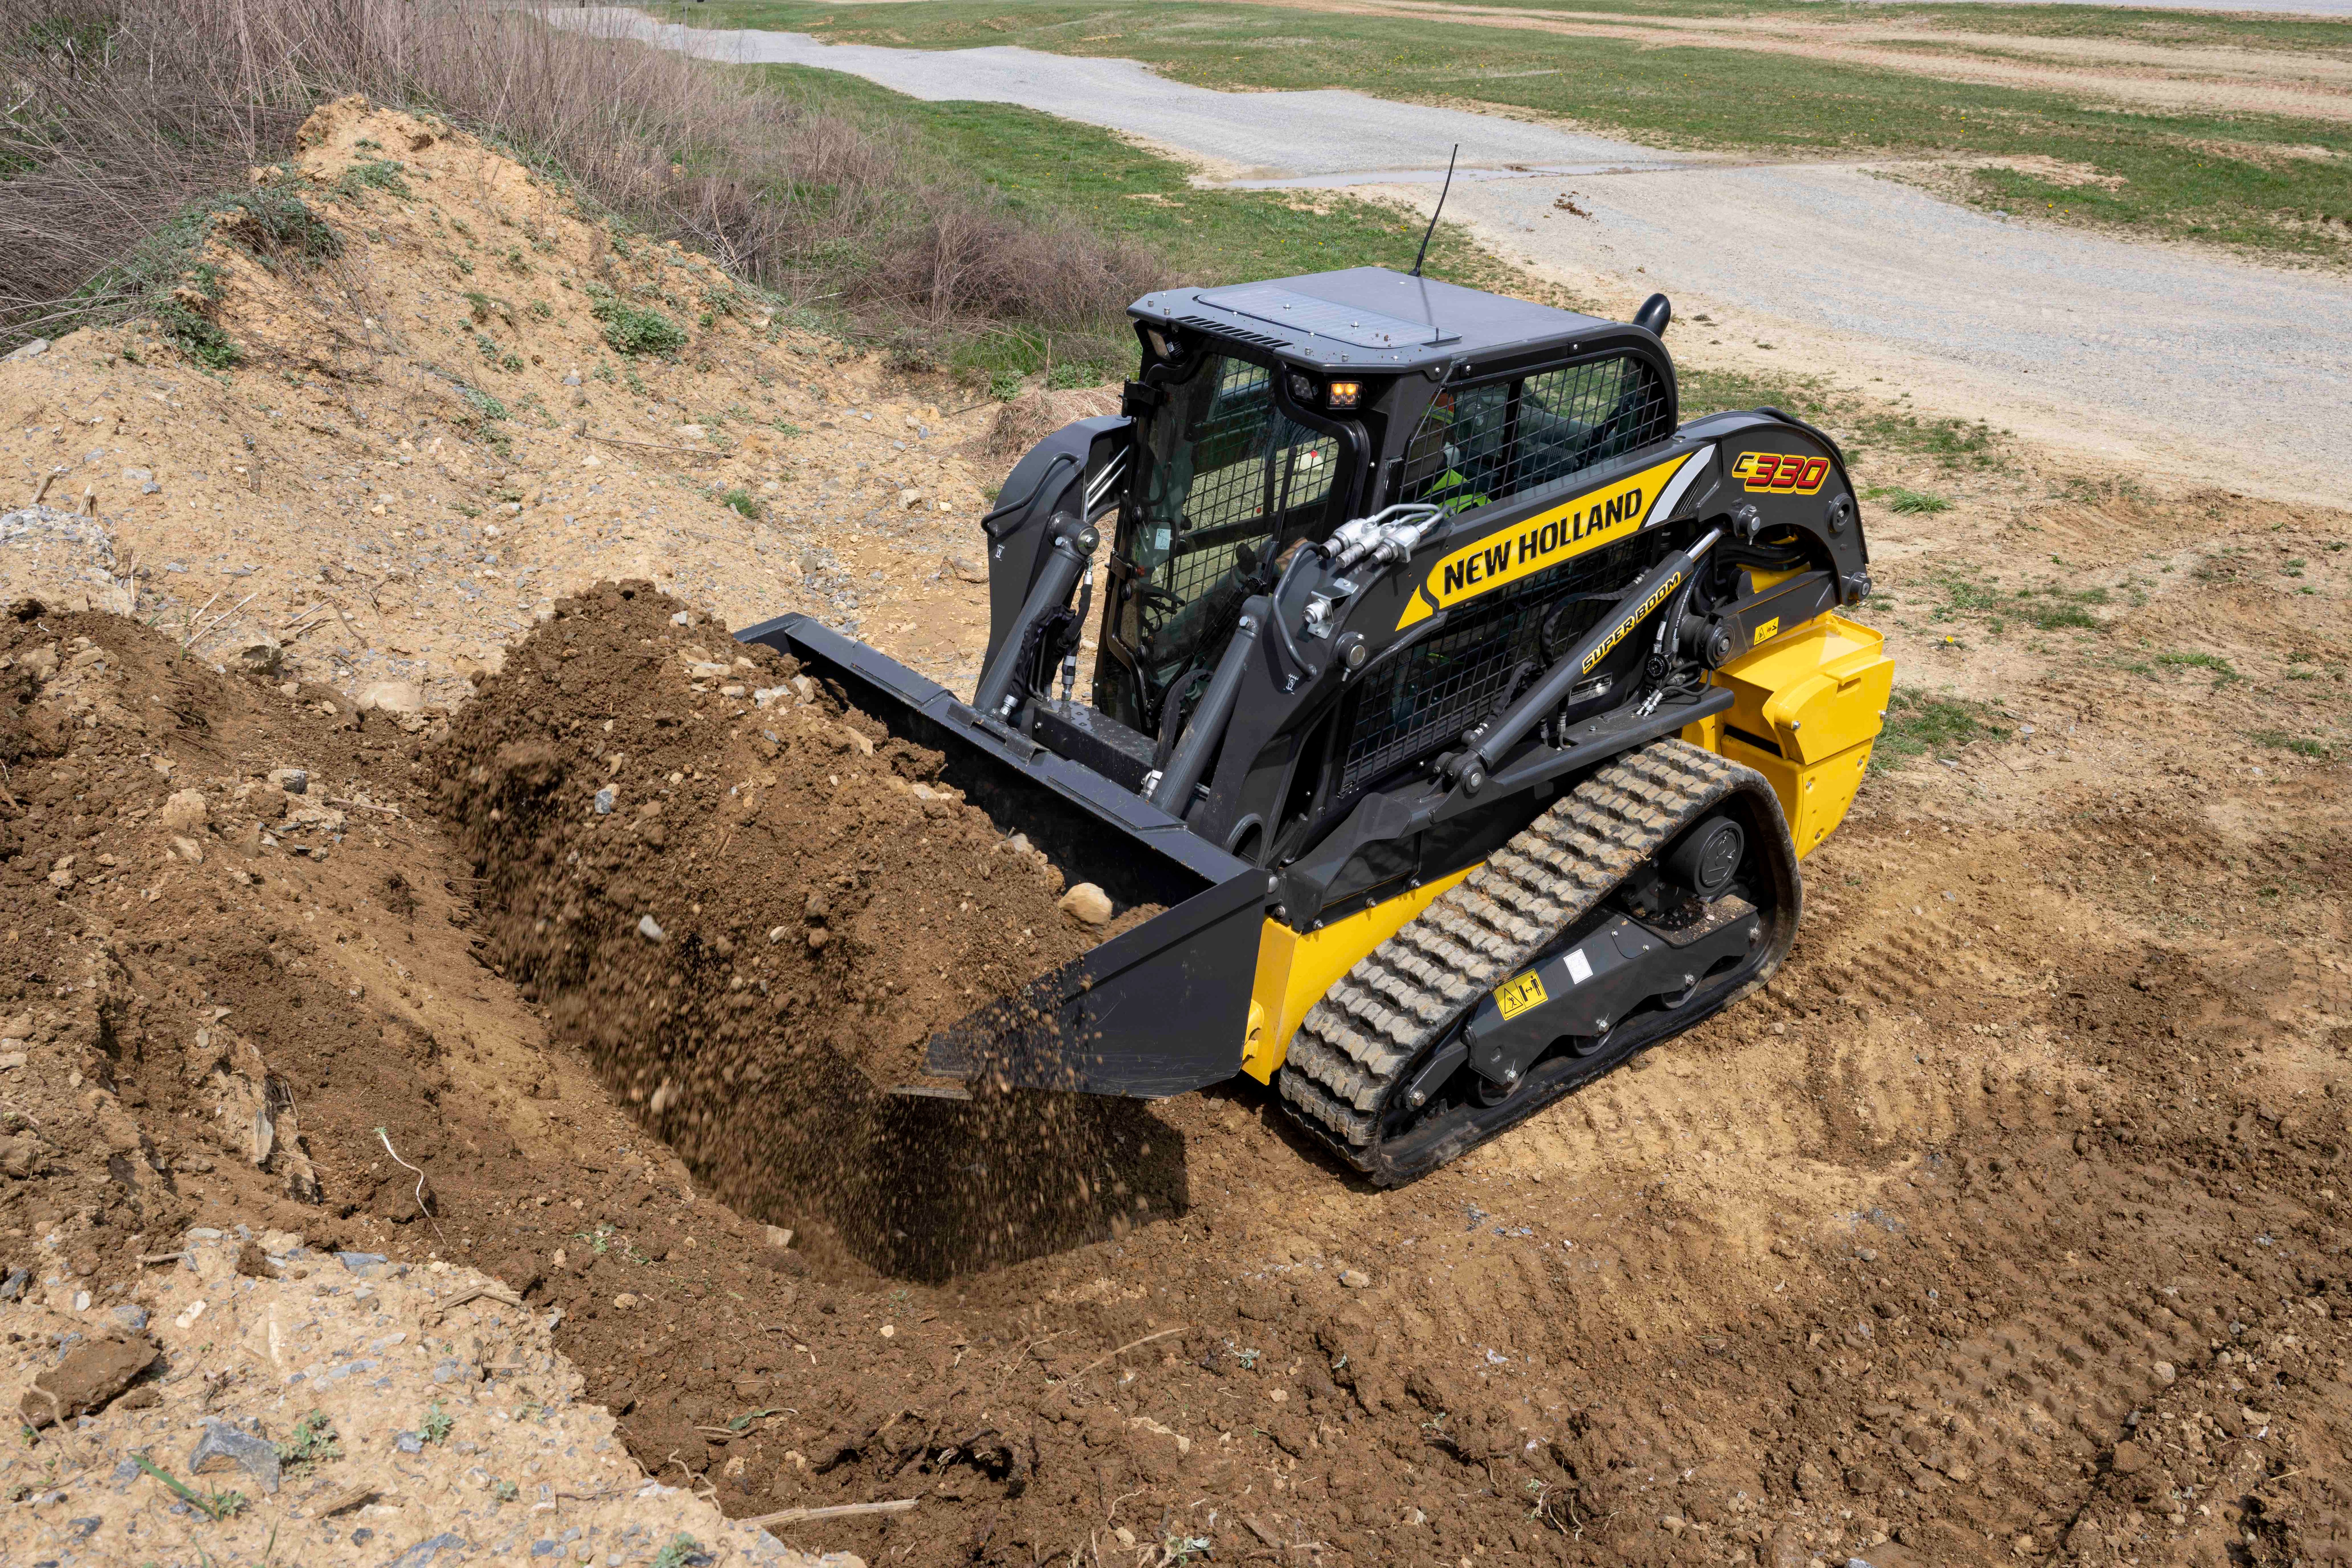 New Holland C330 compact track loader bucketful of dirt